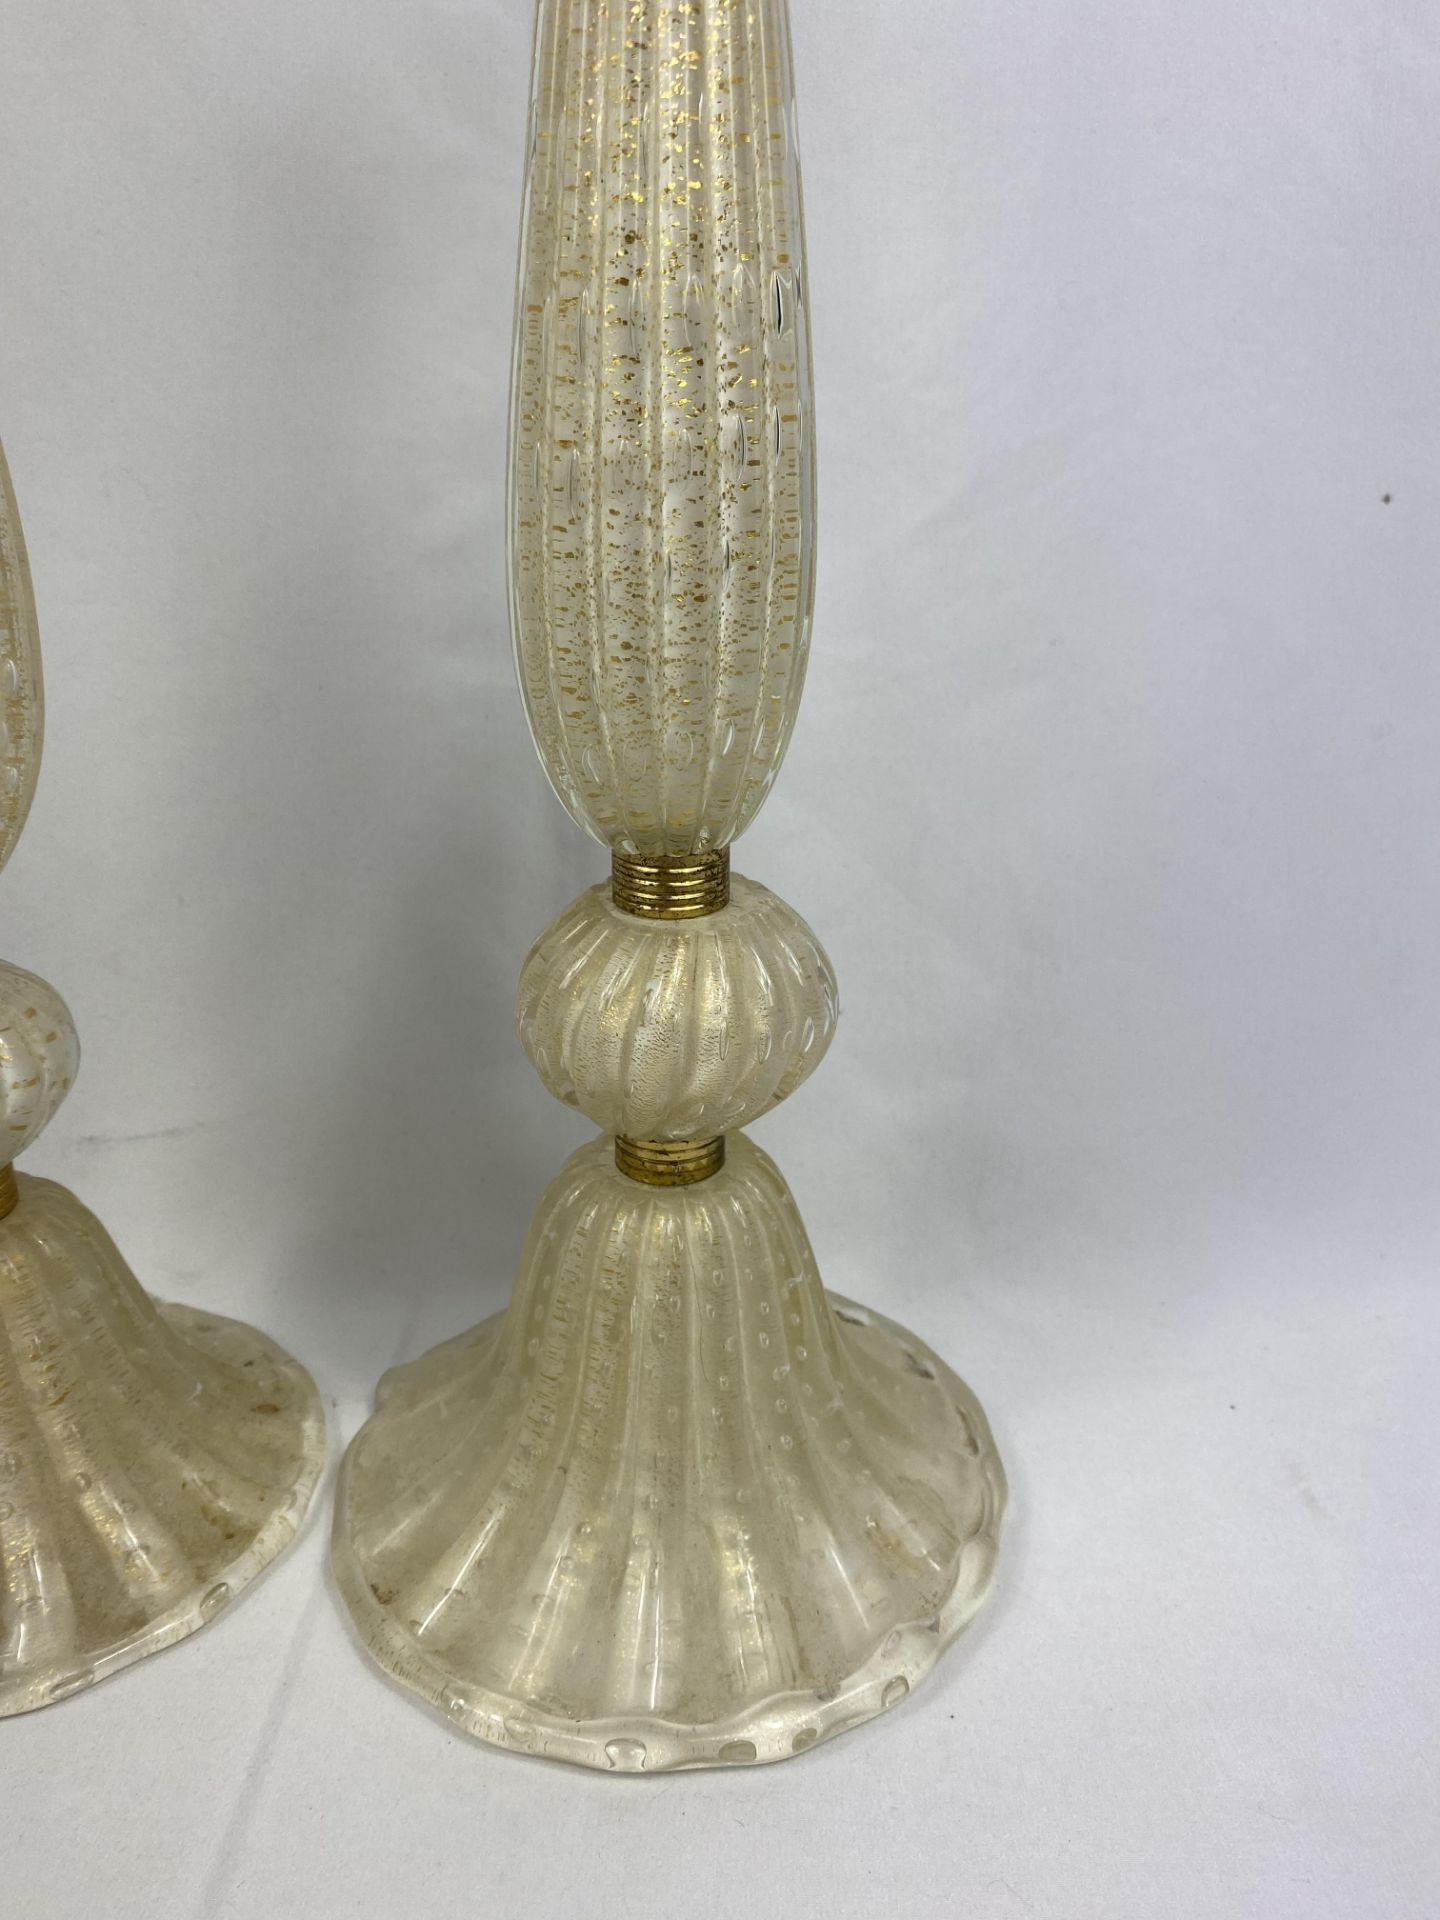 Pair of Barovier & Toso style Murano glass table lamps - Image 3 of 6